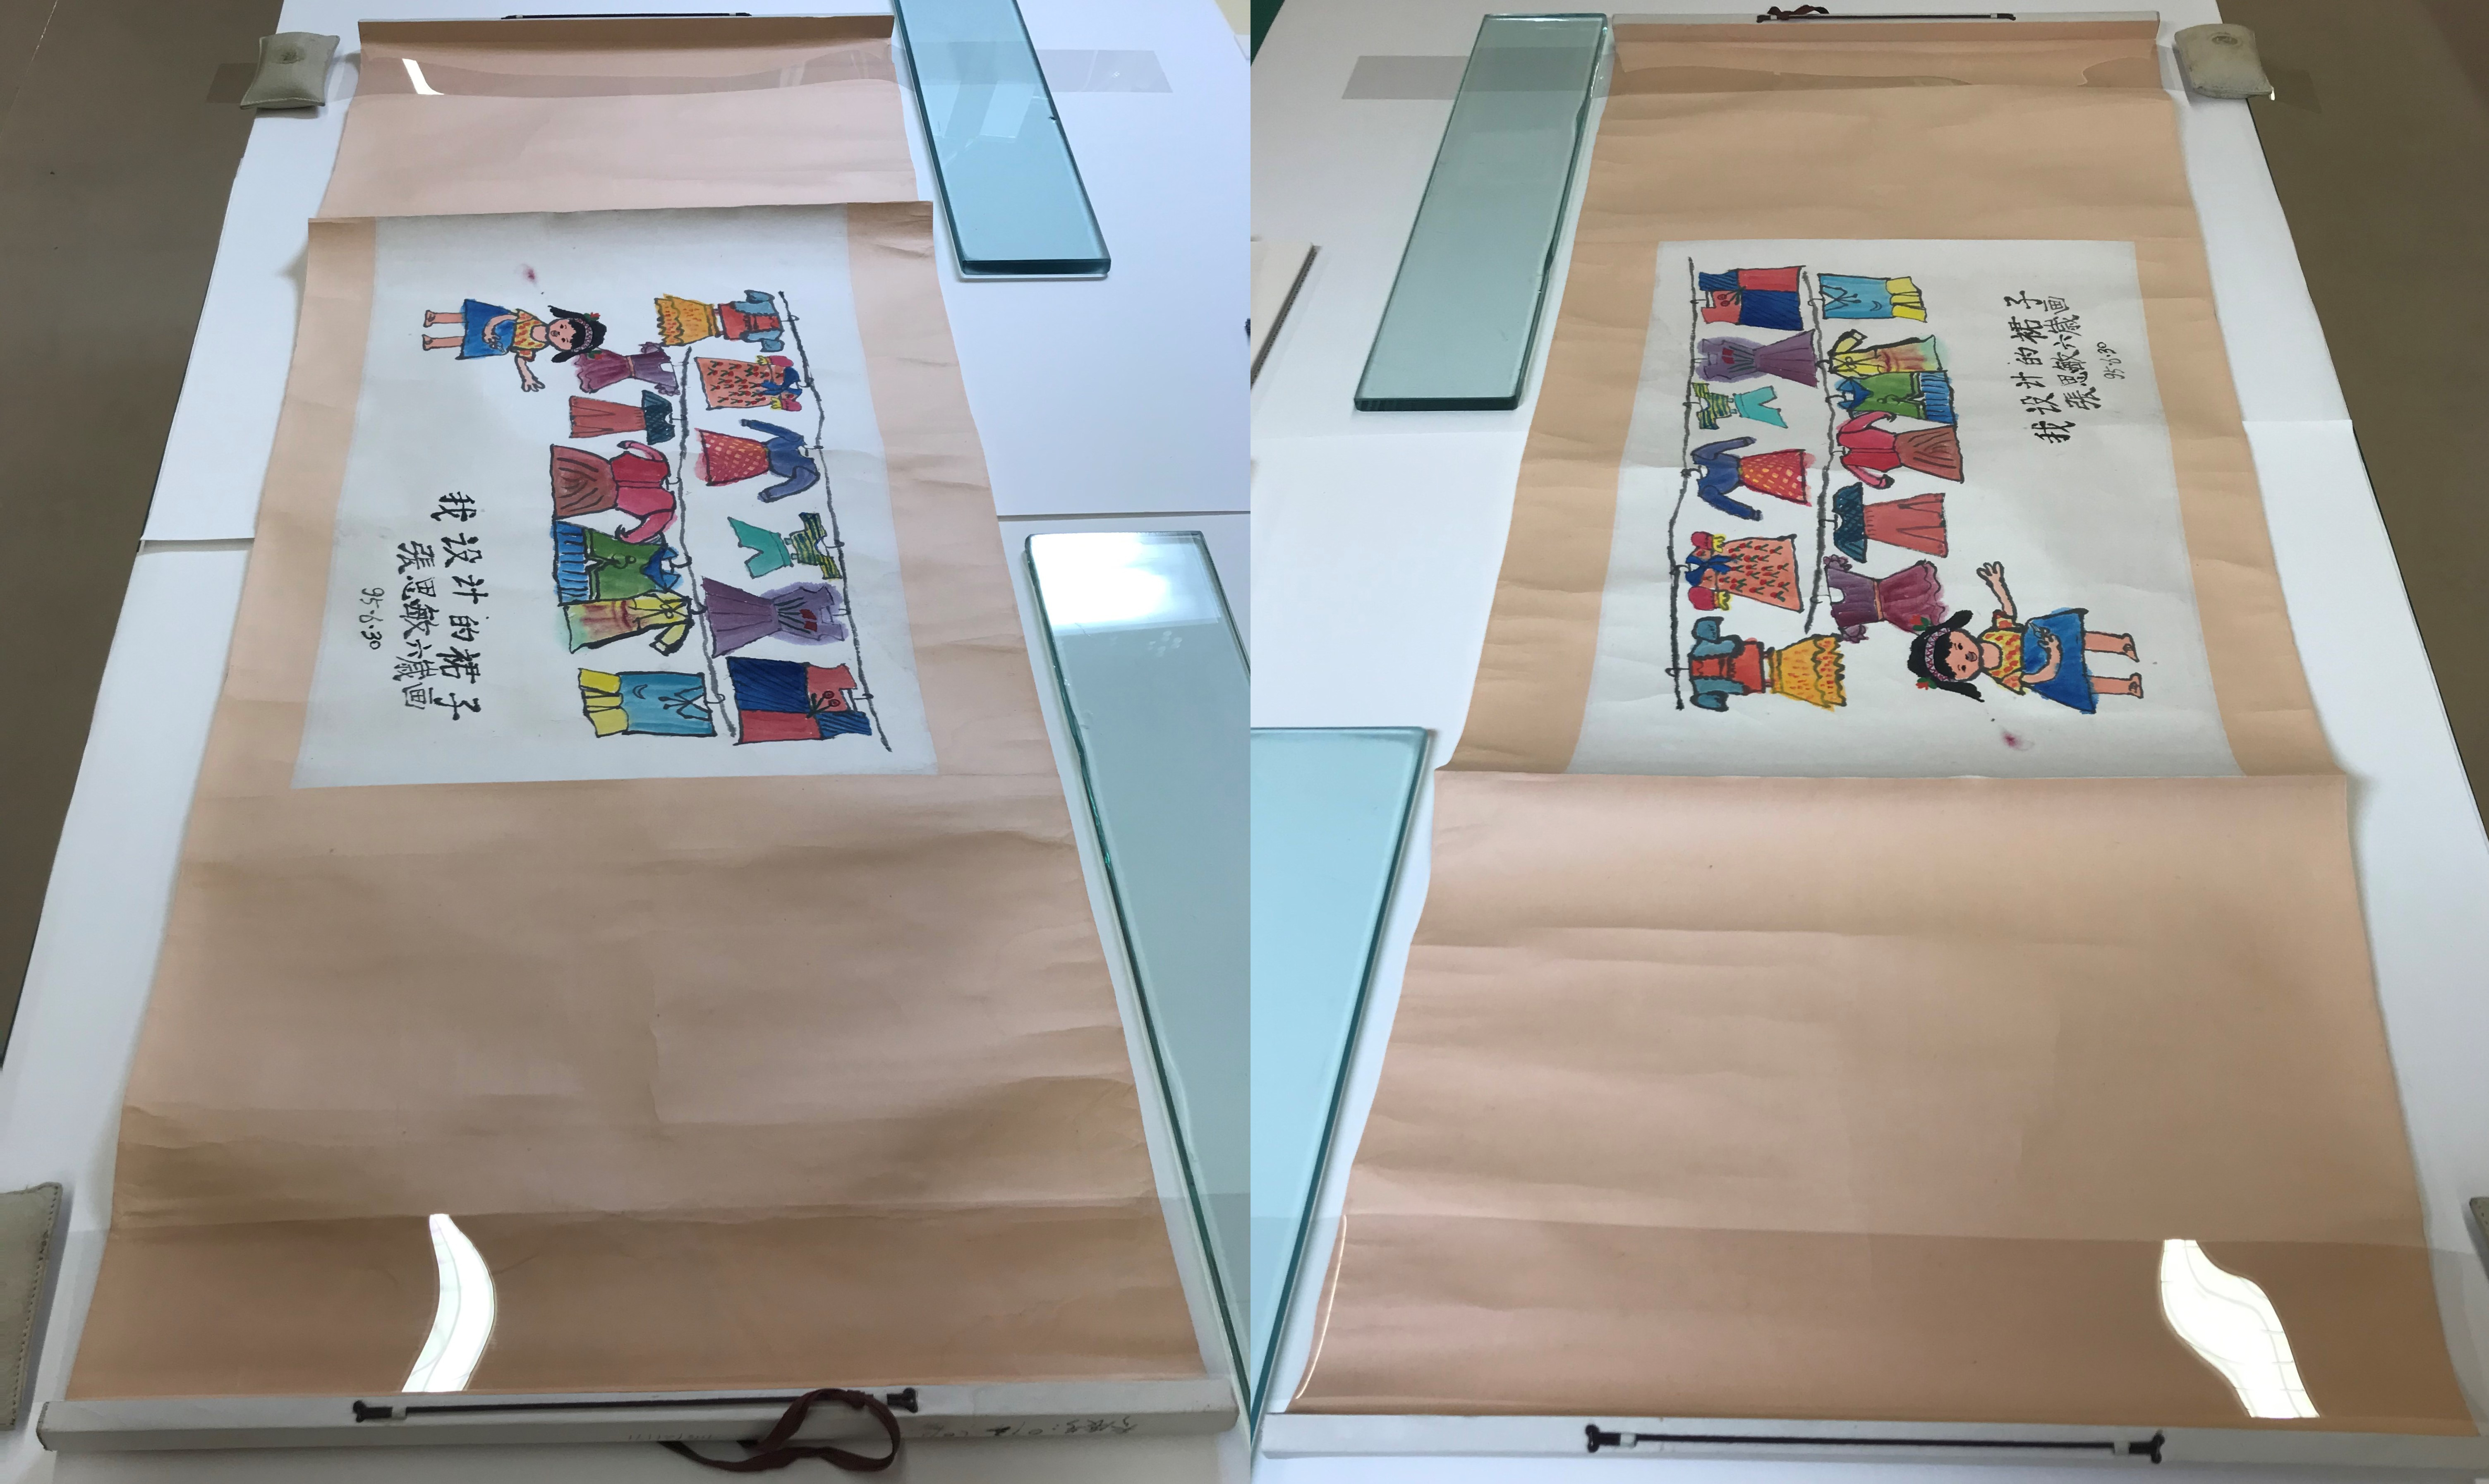 Before conservation: two views in raking light angled across the artwork, highlights damages to the artwork’s borders